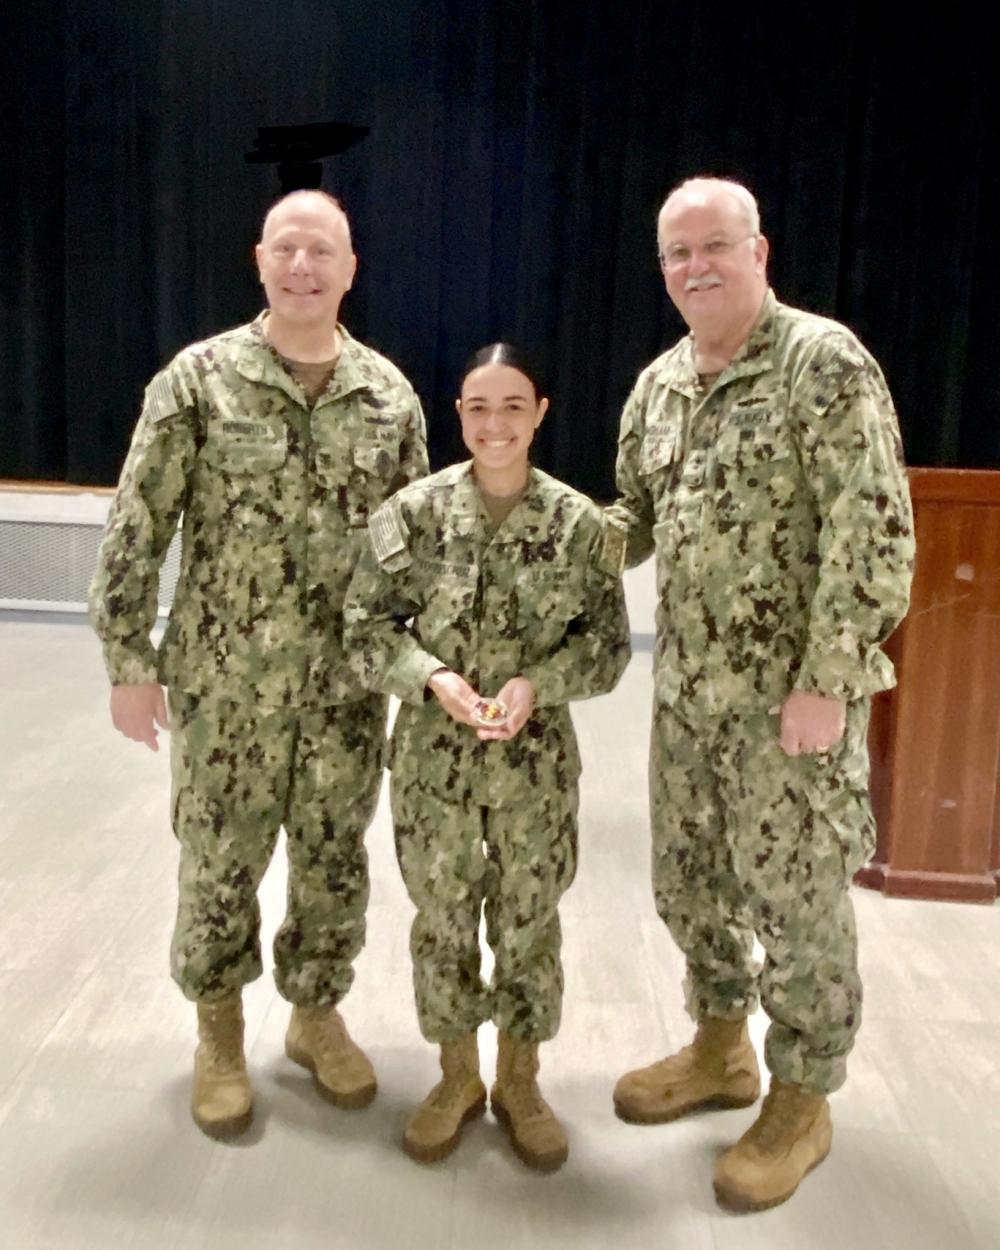 Navy Surgeon General Recognizes Excellence During Visit to Guantanamo Bay